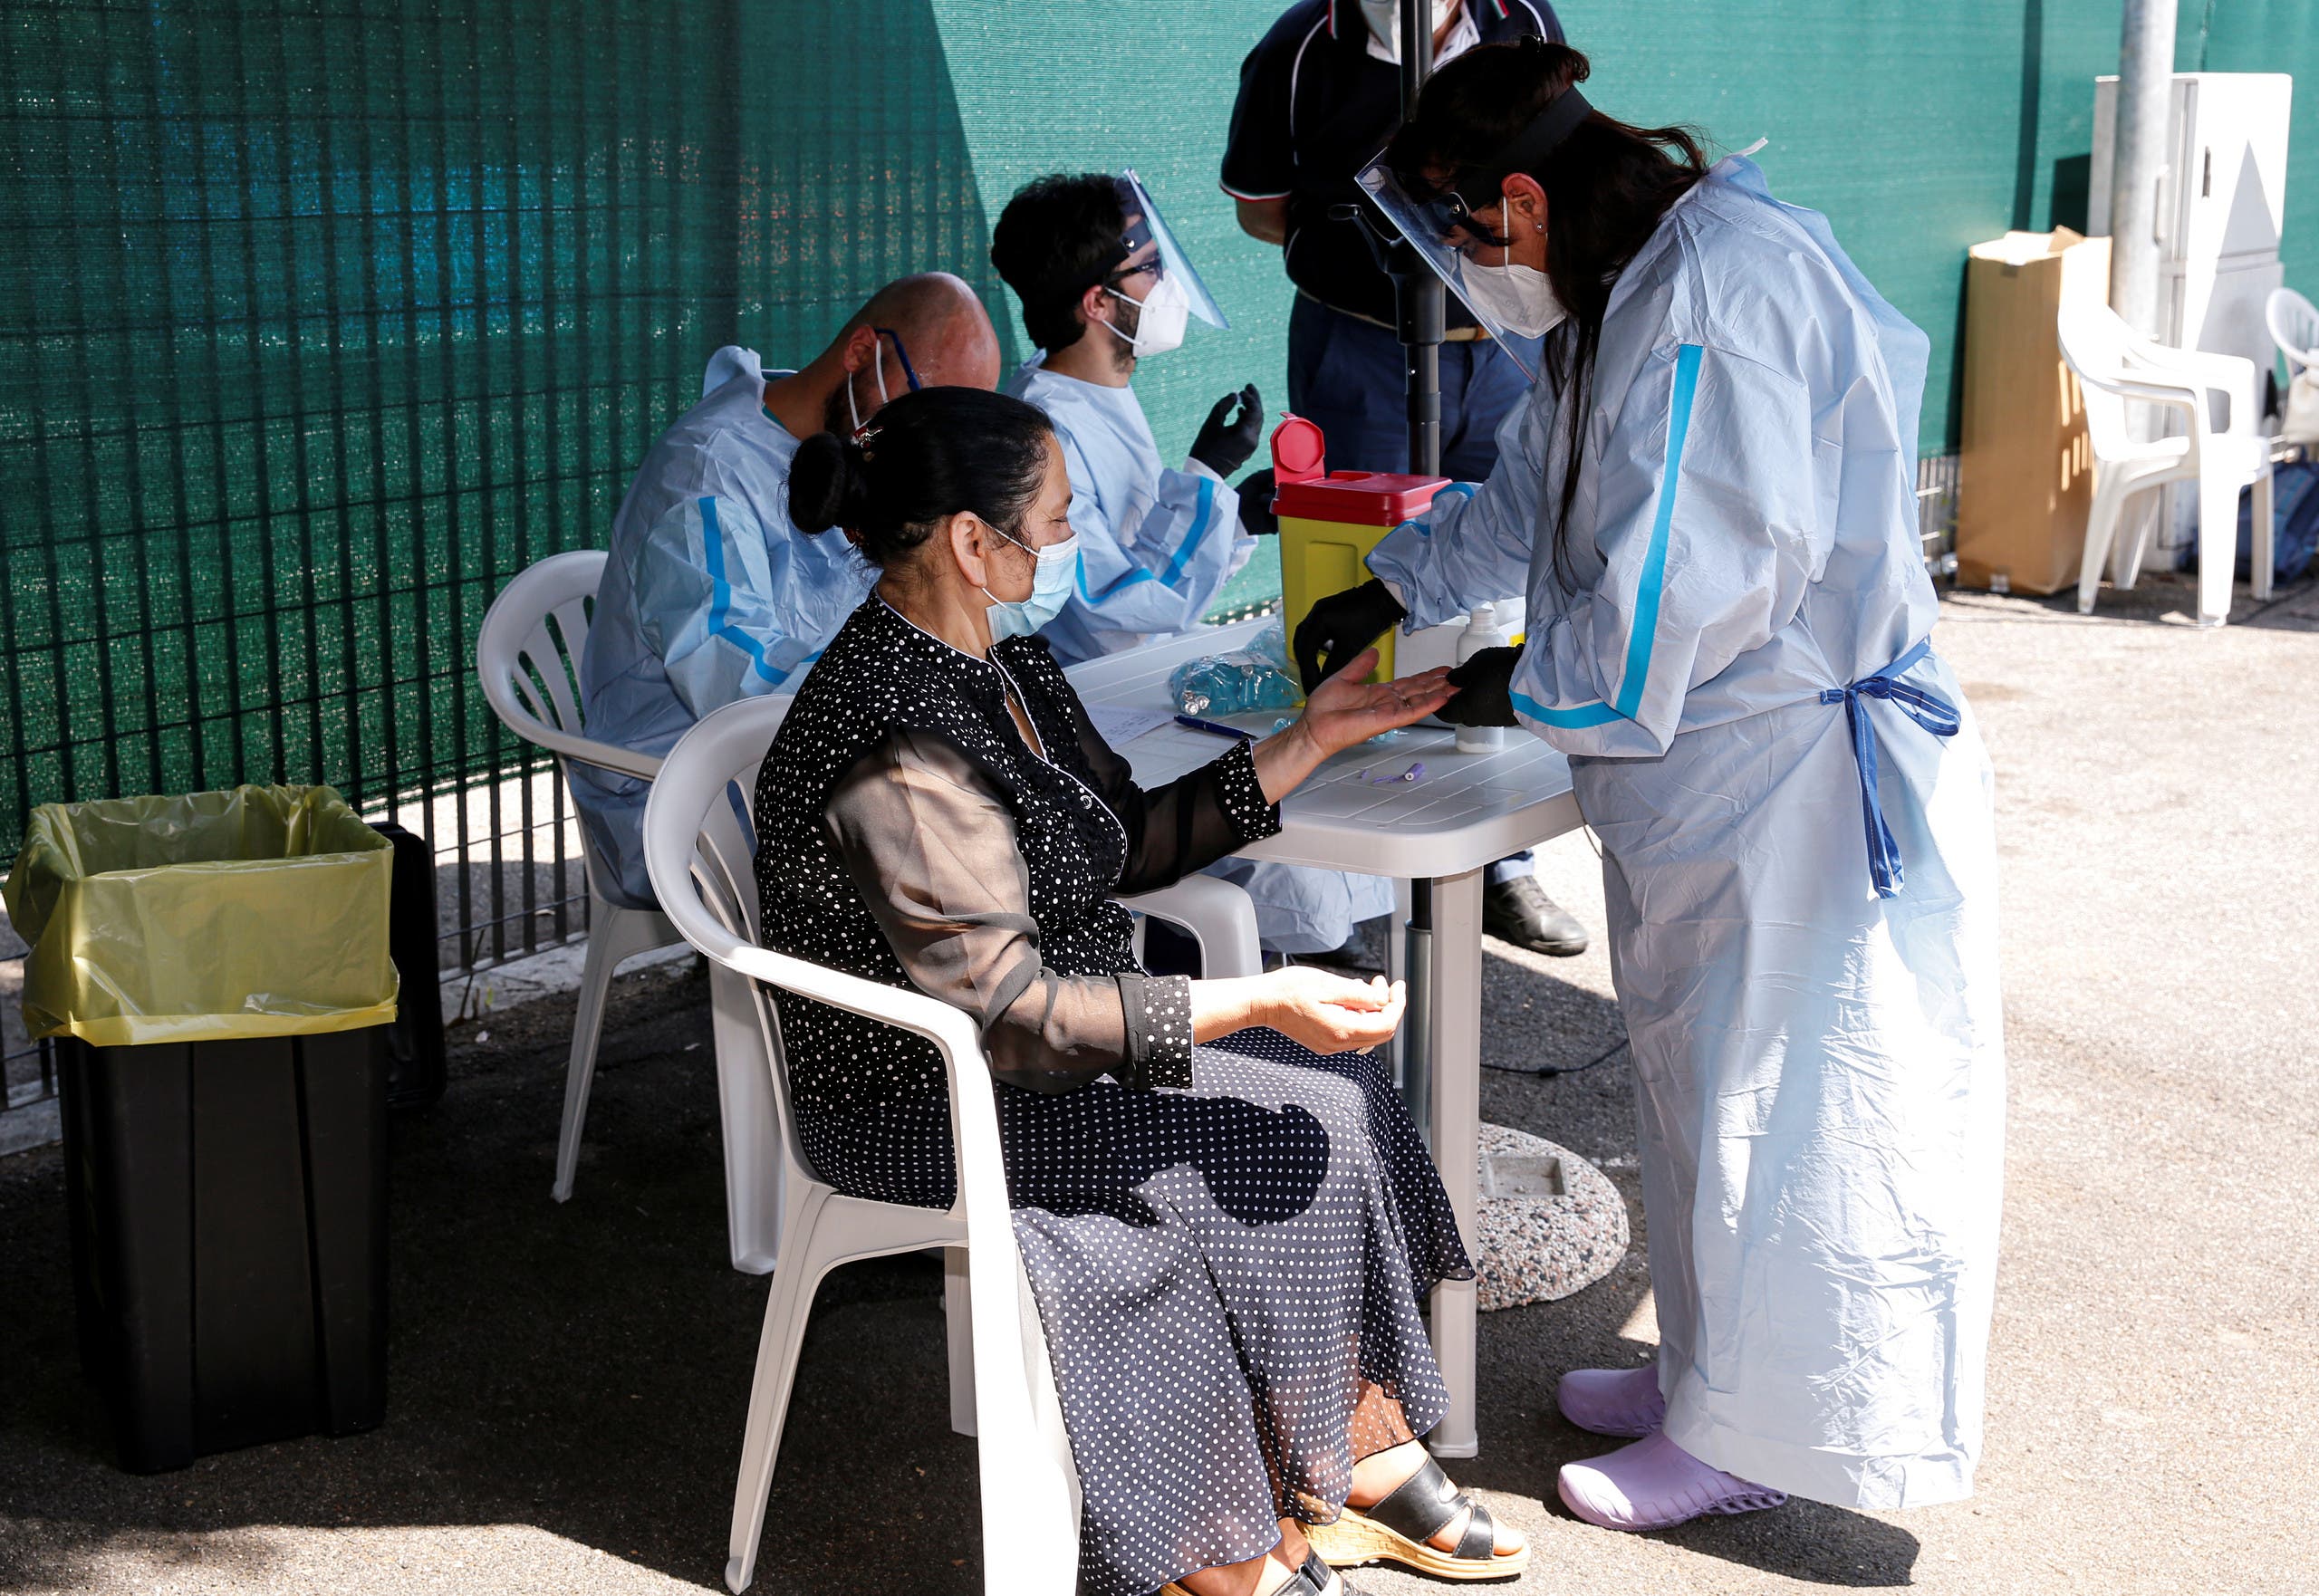 People arriving by coach from Romania take voluntary serological coronavirus disease (COVID-19) tests as part of increased security measures for 'risk' countries, in Rome, Italy July 29, 2020. (Reuters)